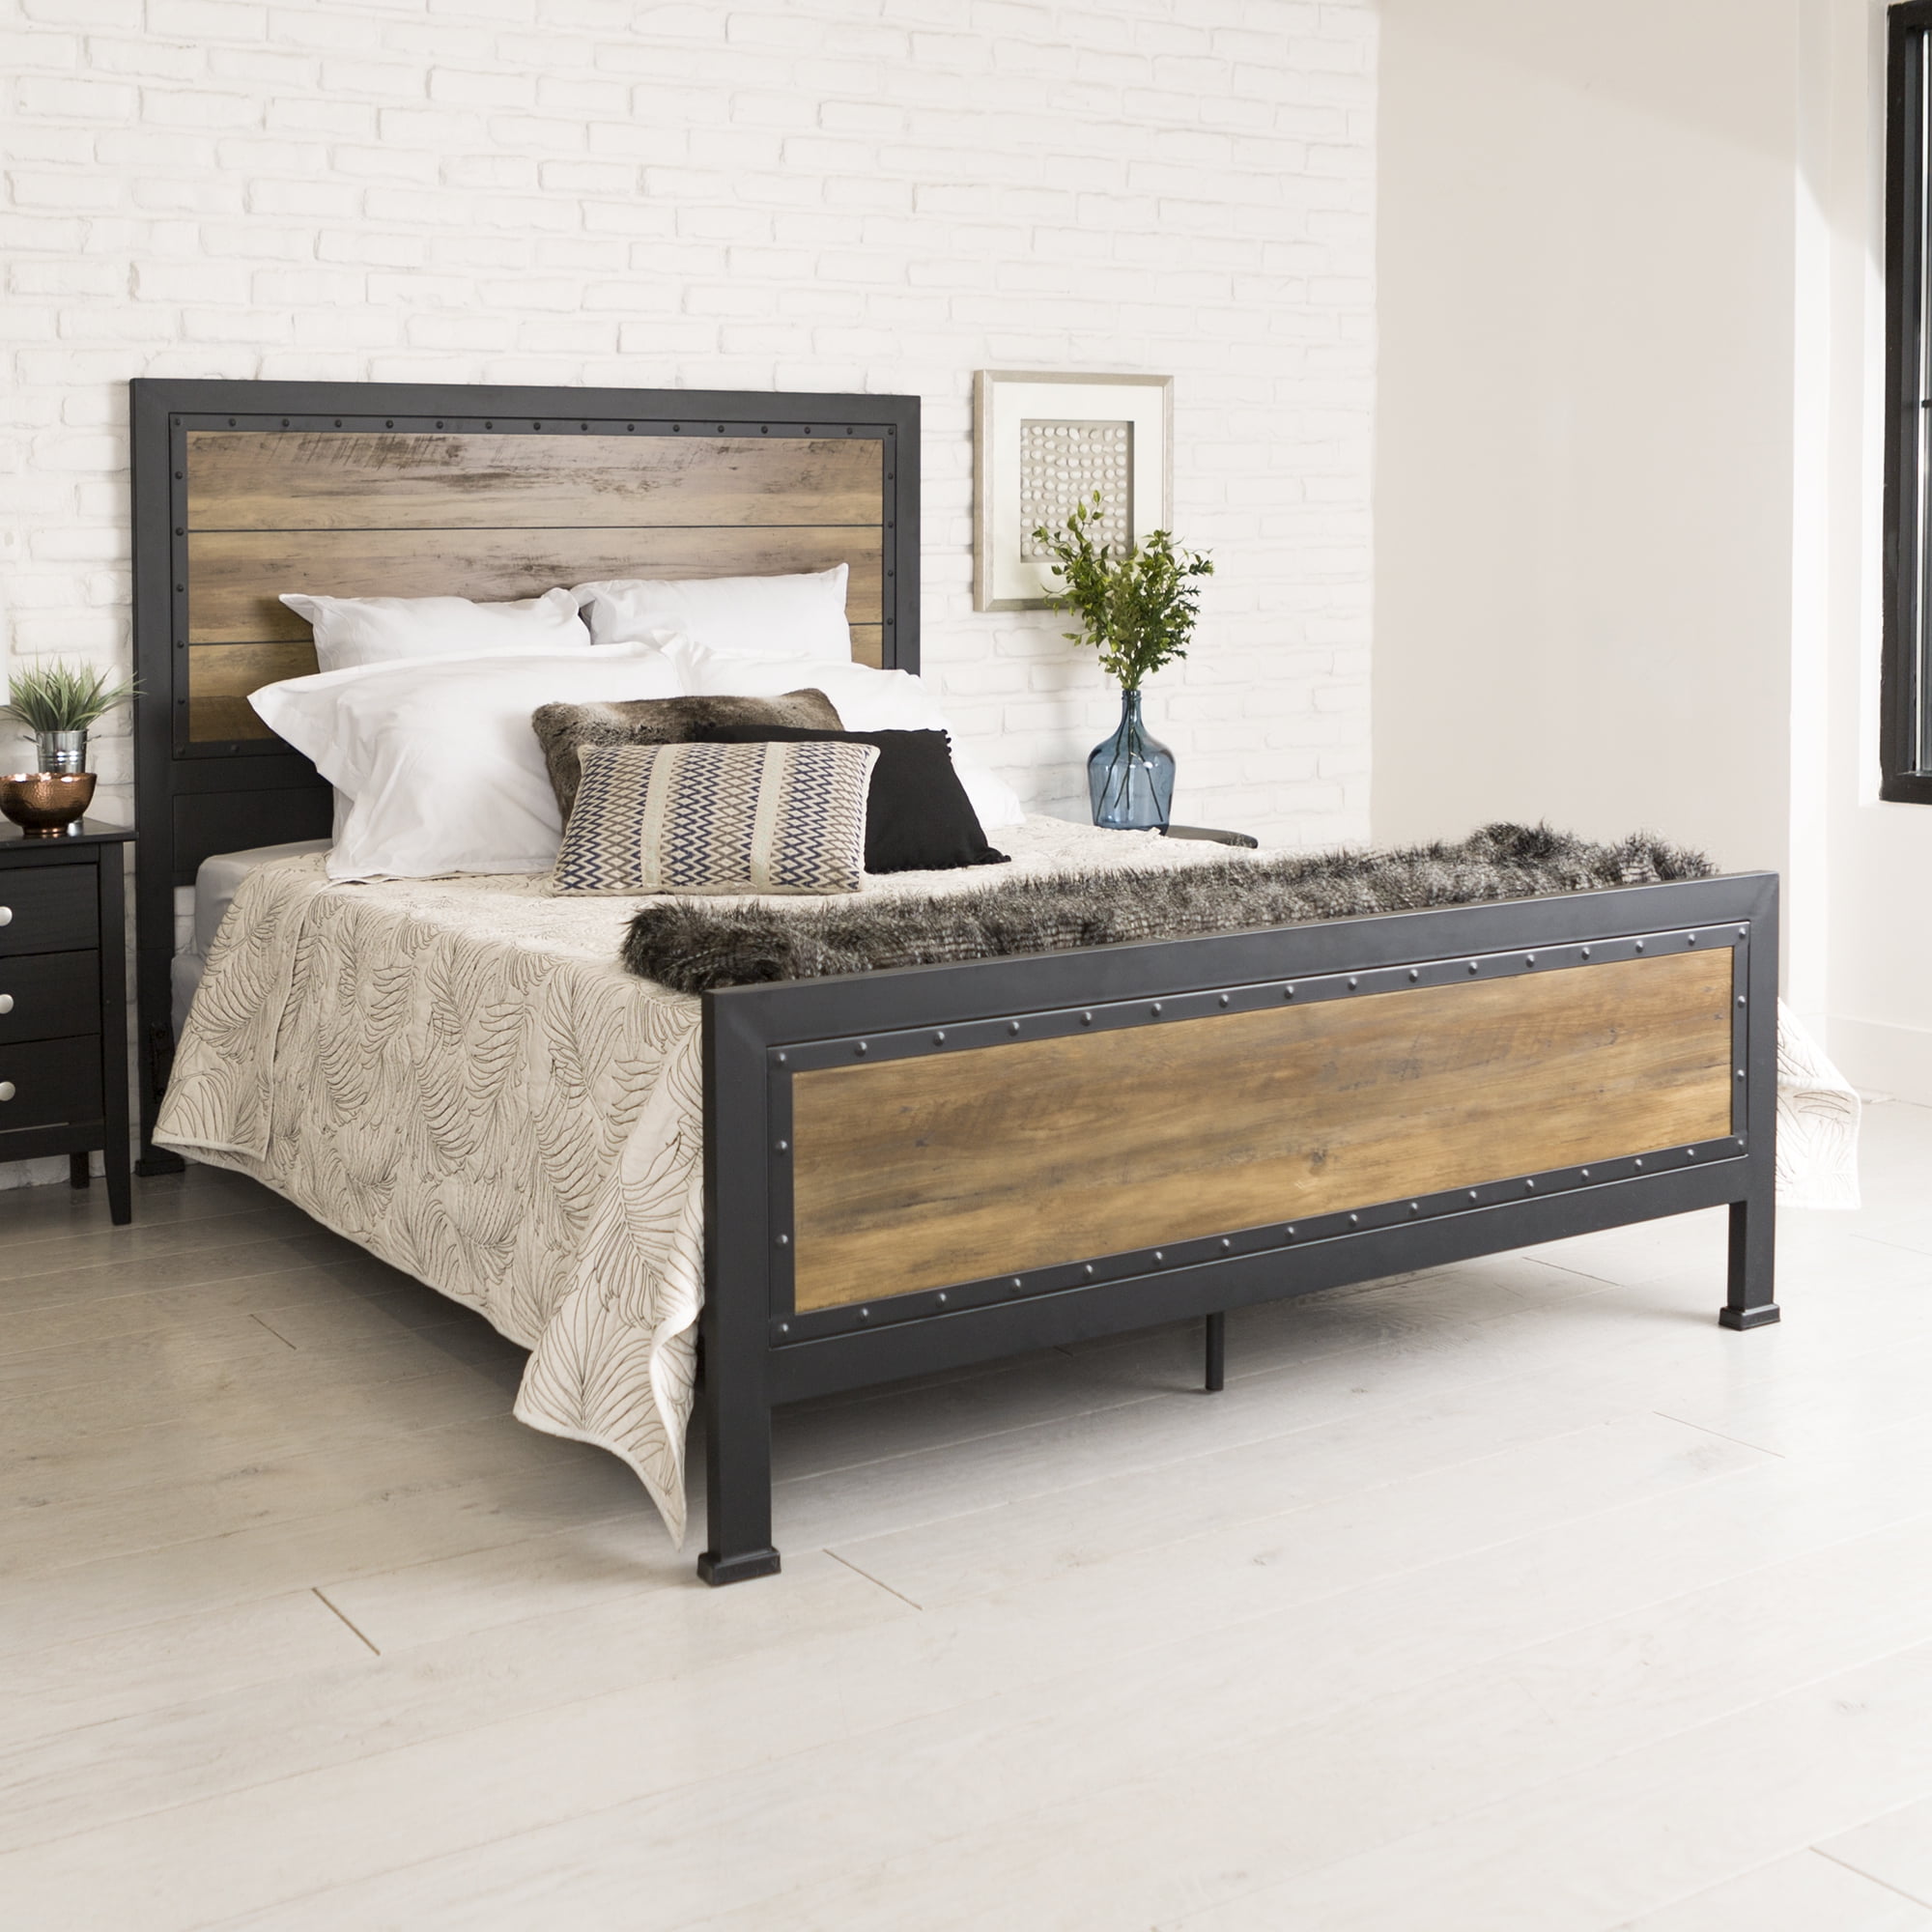 queen size bed dimensions usa